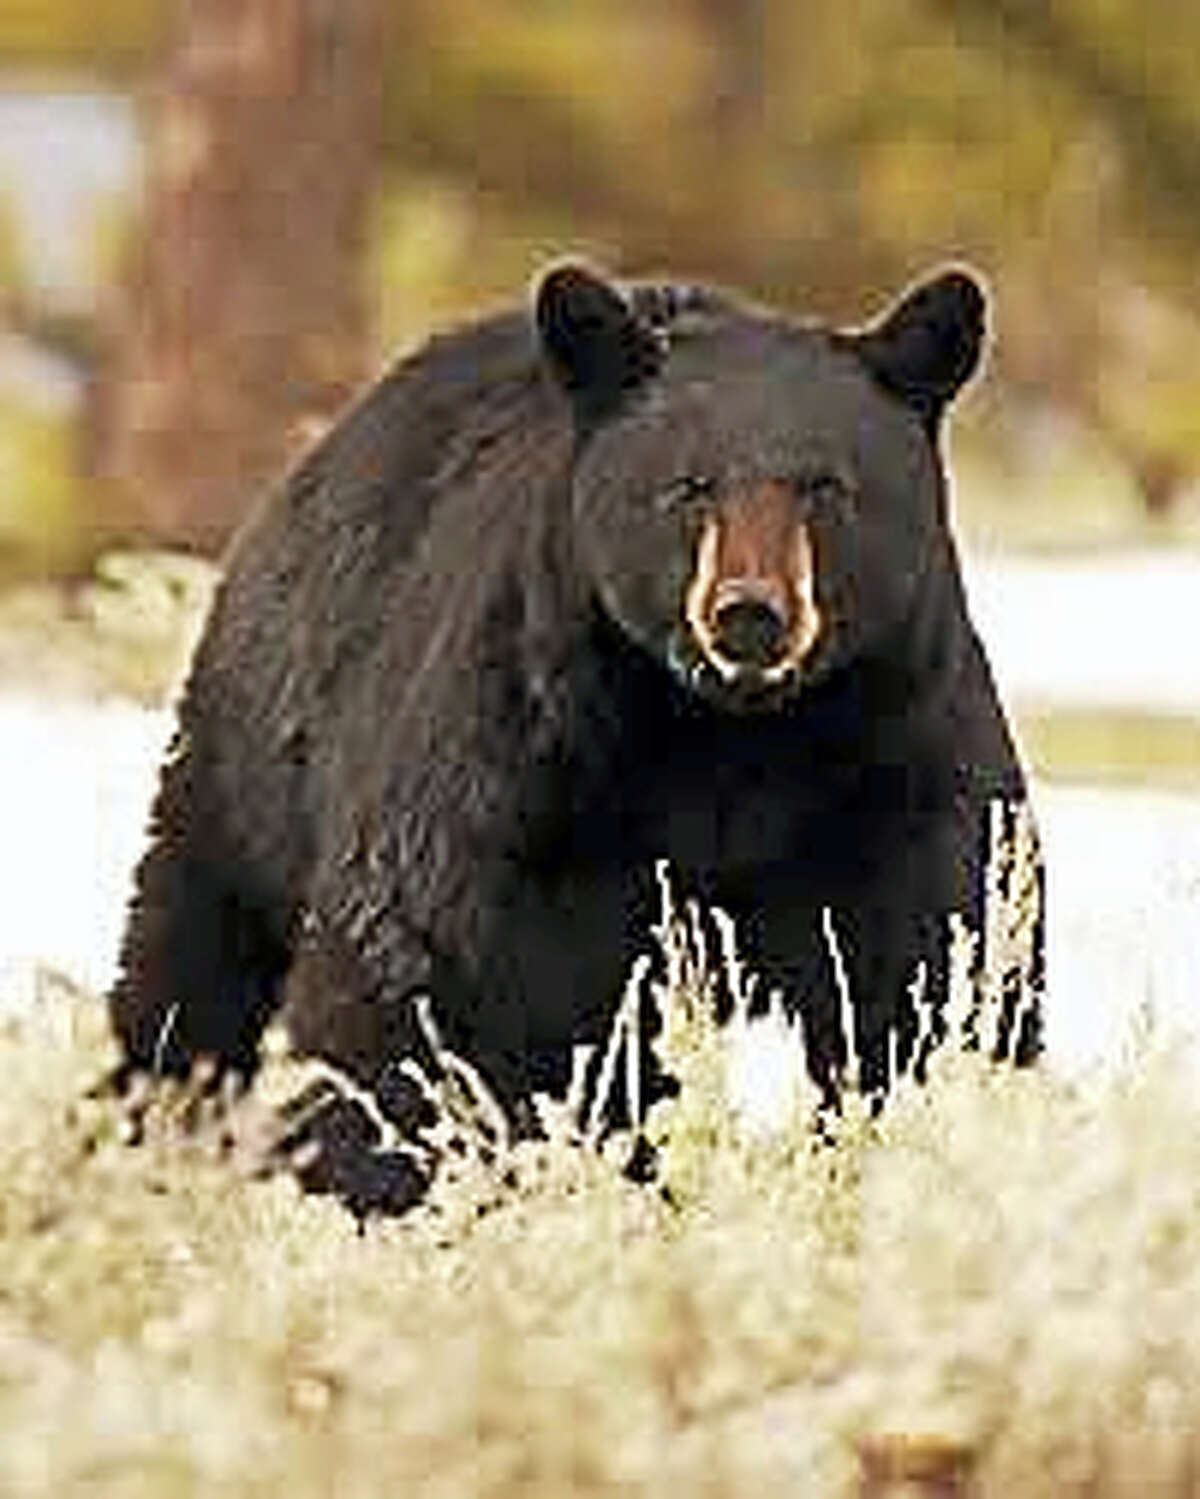 BETTER CUTLINEA free, illustrated talk on black bears in the state will be presented by Master Wildlife Conservationist Paul Colburn at 6:30 p.m. Jan. 26 at the Essex Library, 33 West Ave. Coburn will focus on the natural history, habitat, diet, behavior of the animals, with information on research and co-existence with the bears. RSVP: 860-767-1560.